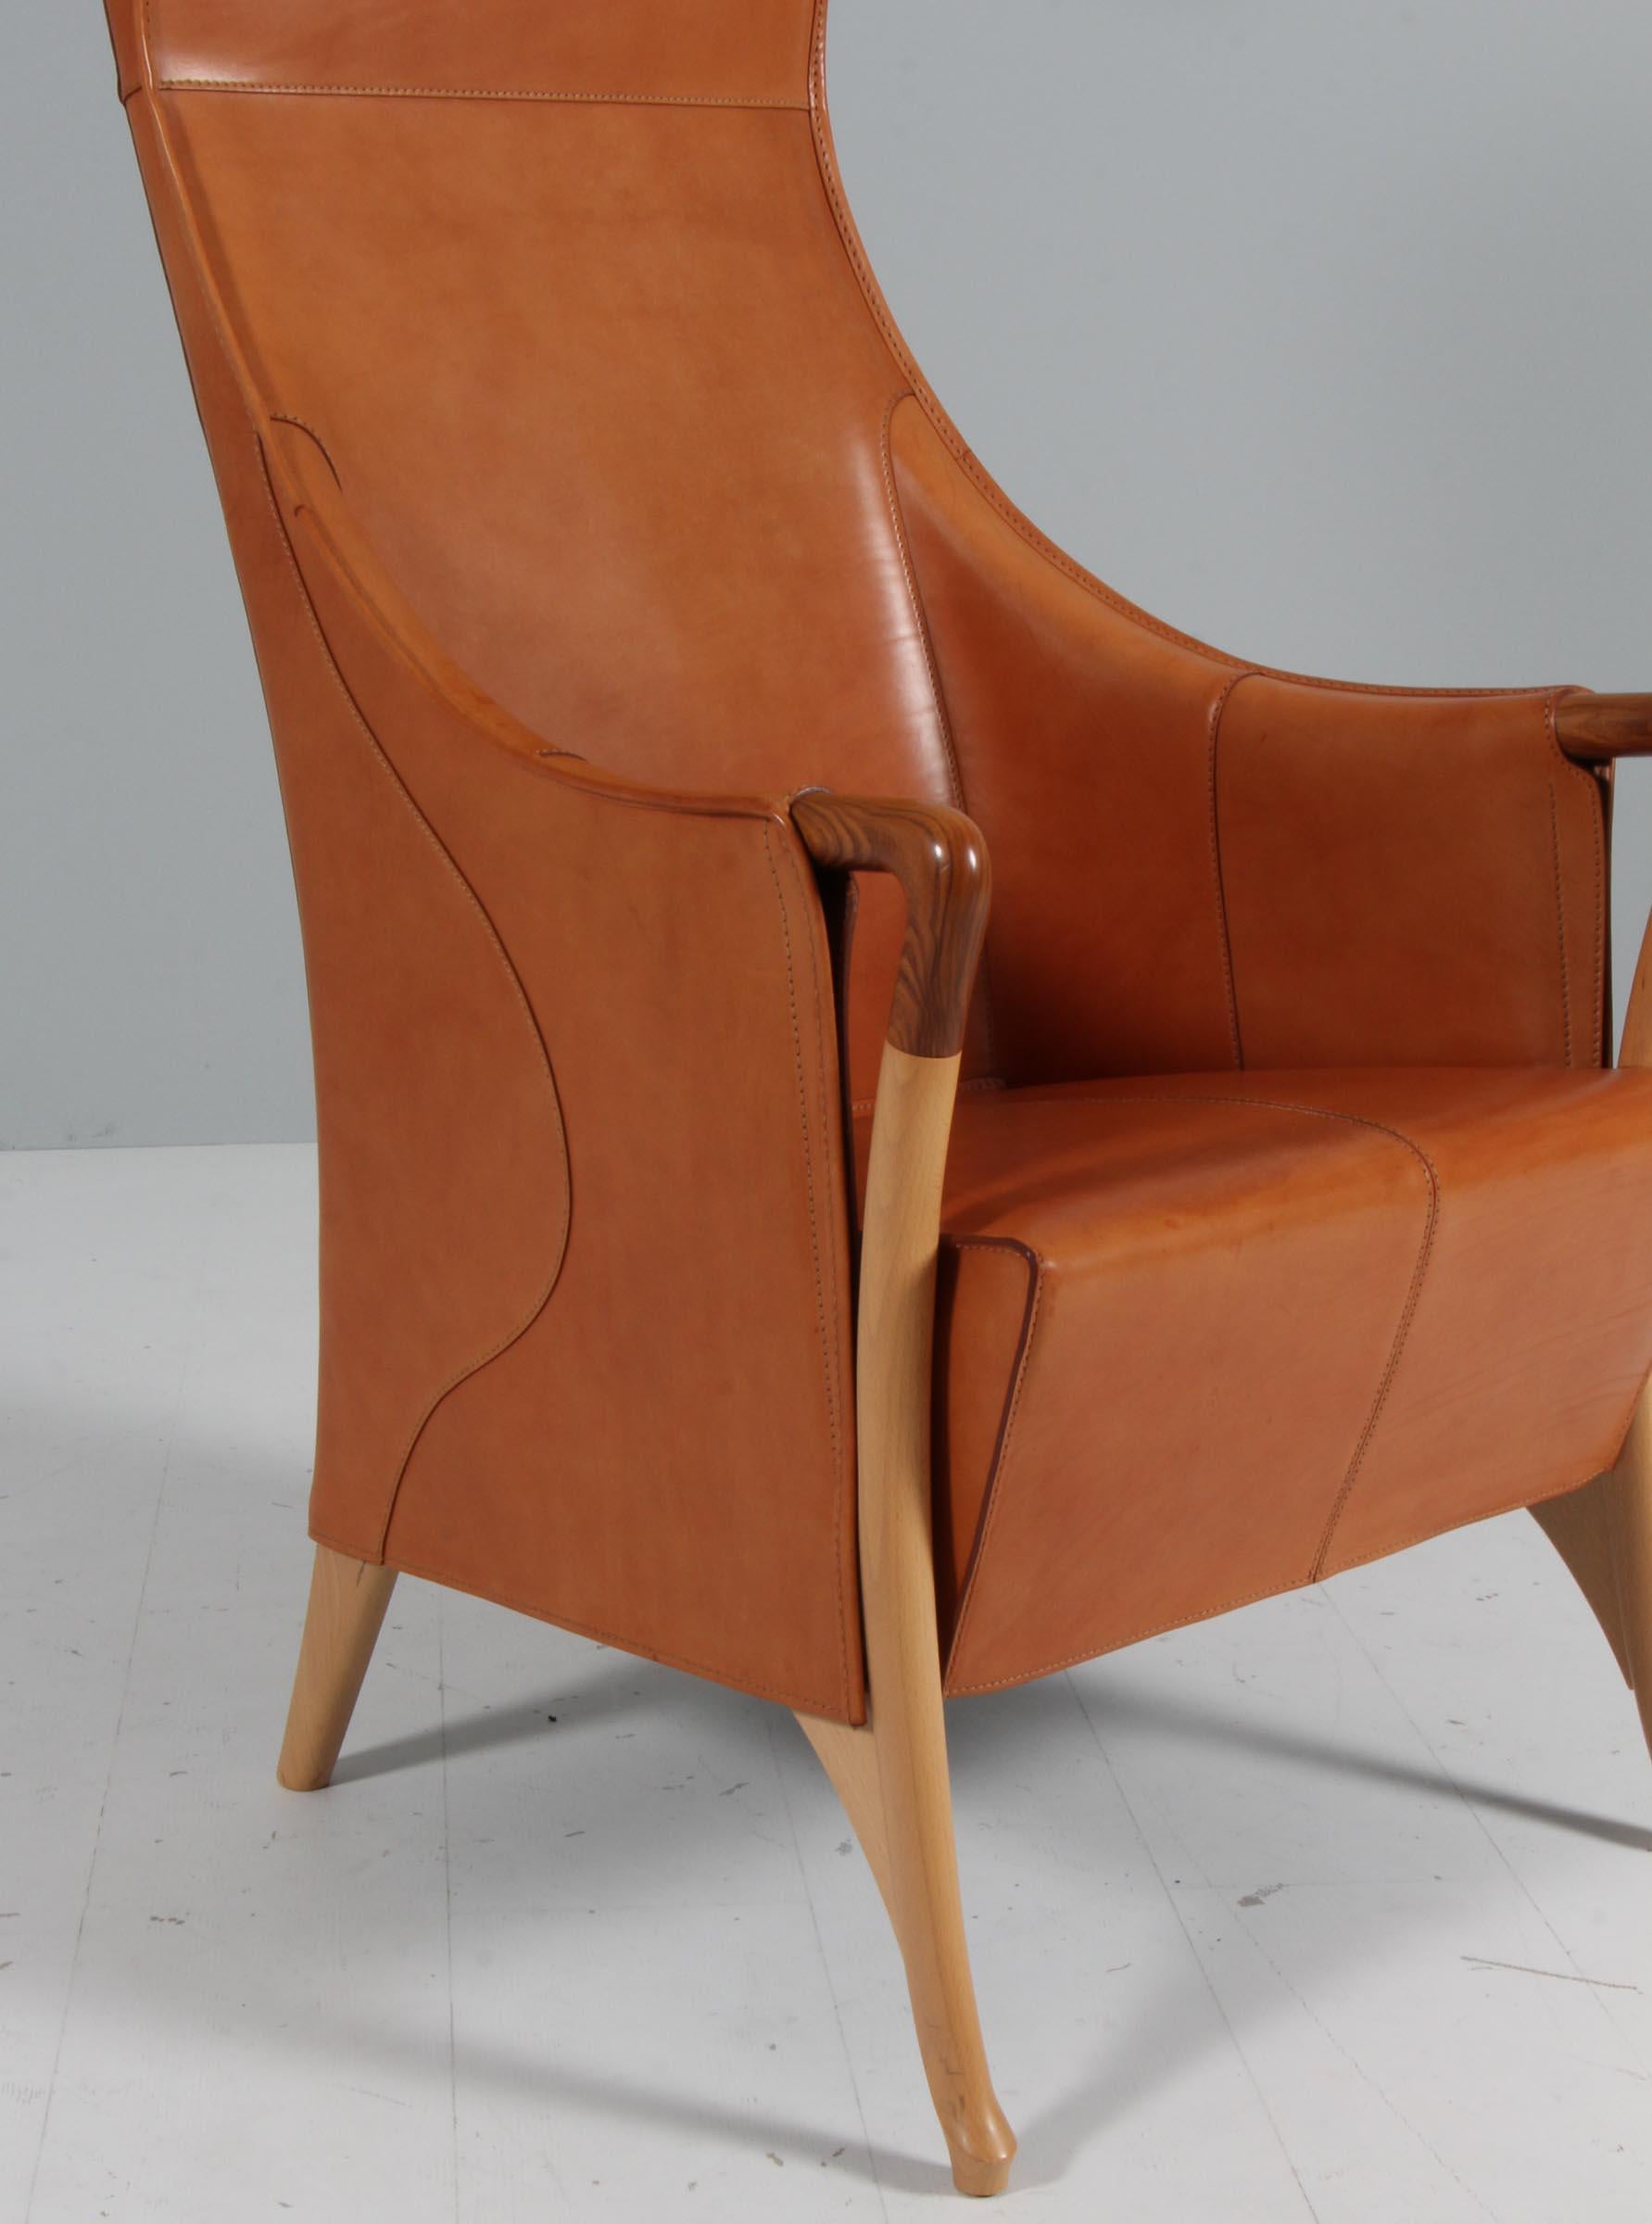 Umberto Asnago for Giorgetti lounge chair in saddle leather In Good Condition For Sale In Esbjerg, DK